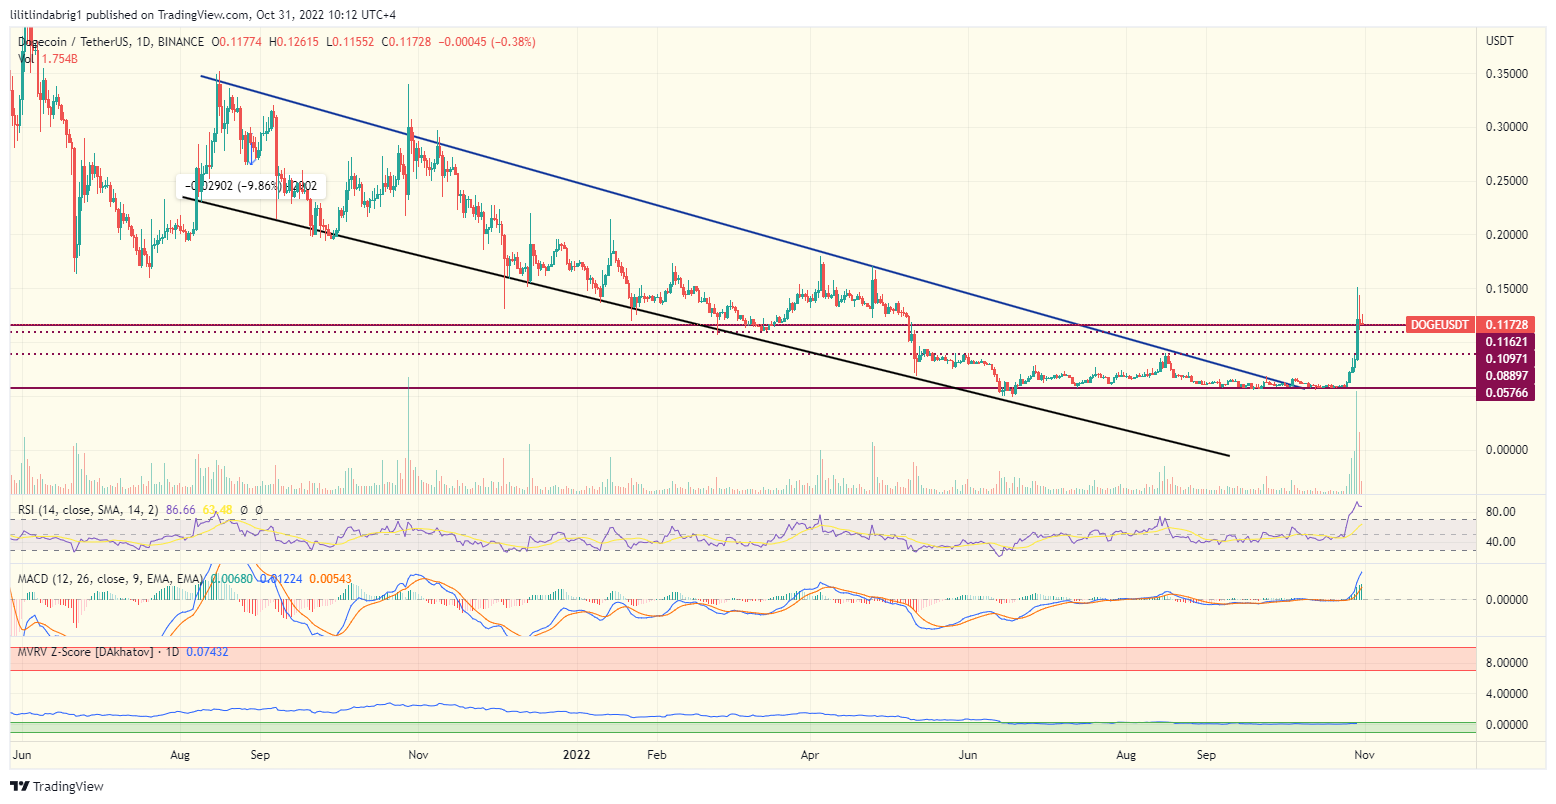 Dogecoin (DOGE) price action chart.